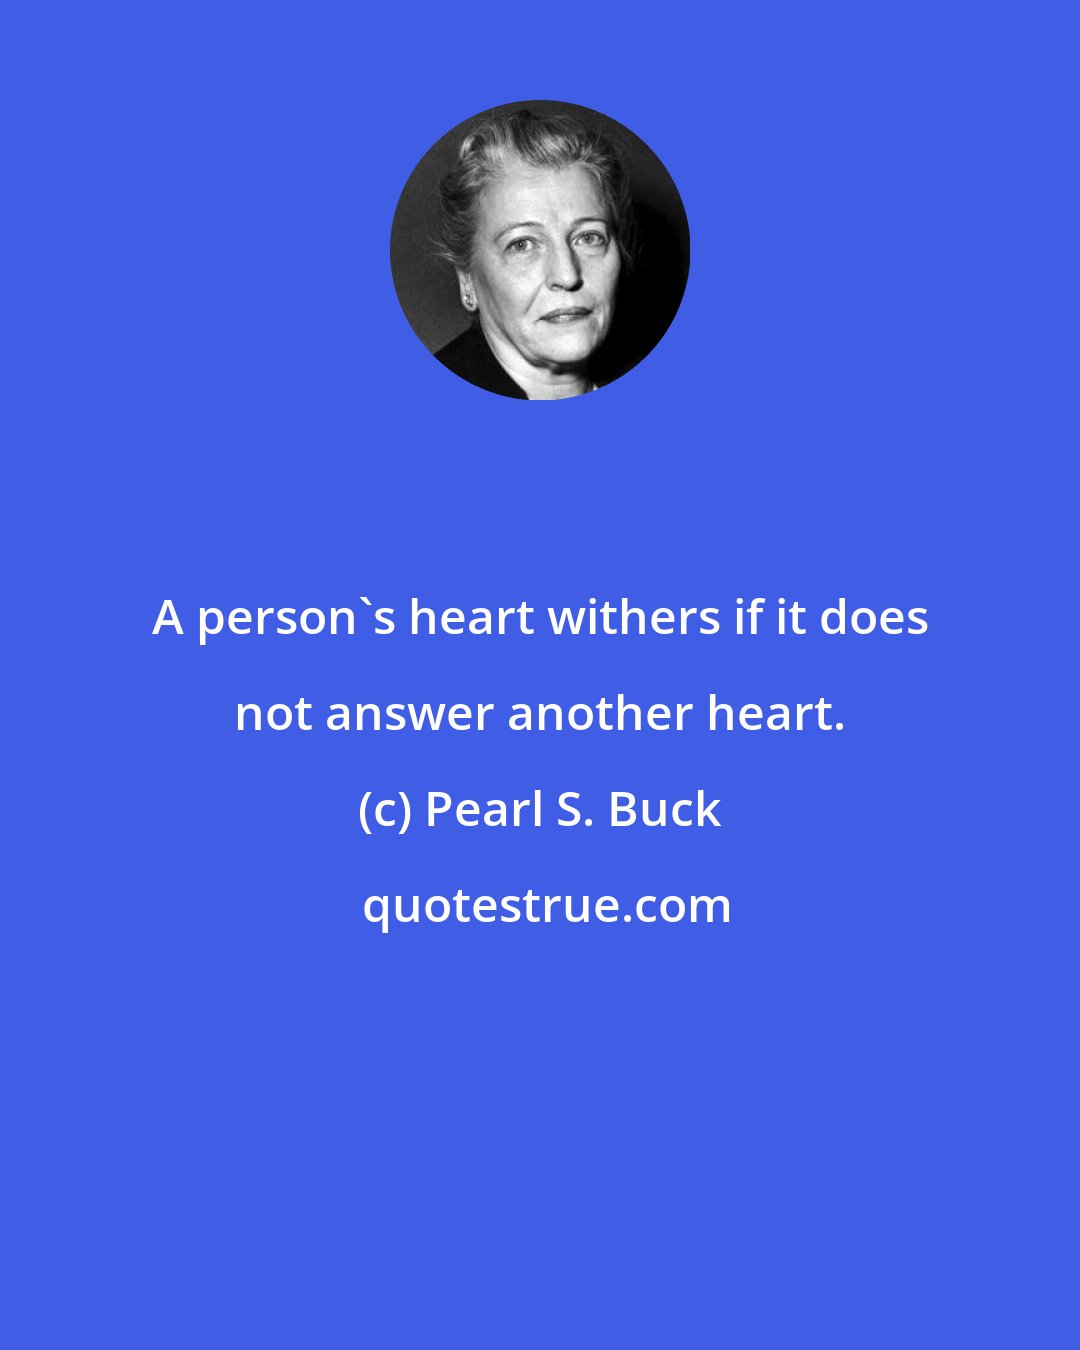 Pearl S. Buck: A person's heart withers if it does not answer another heart.